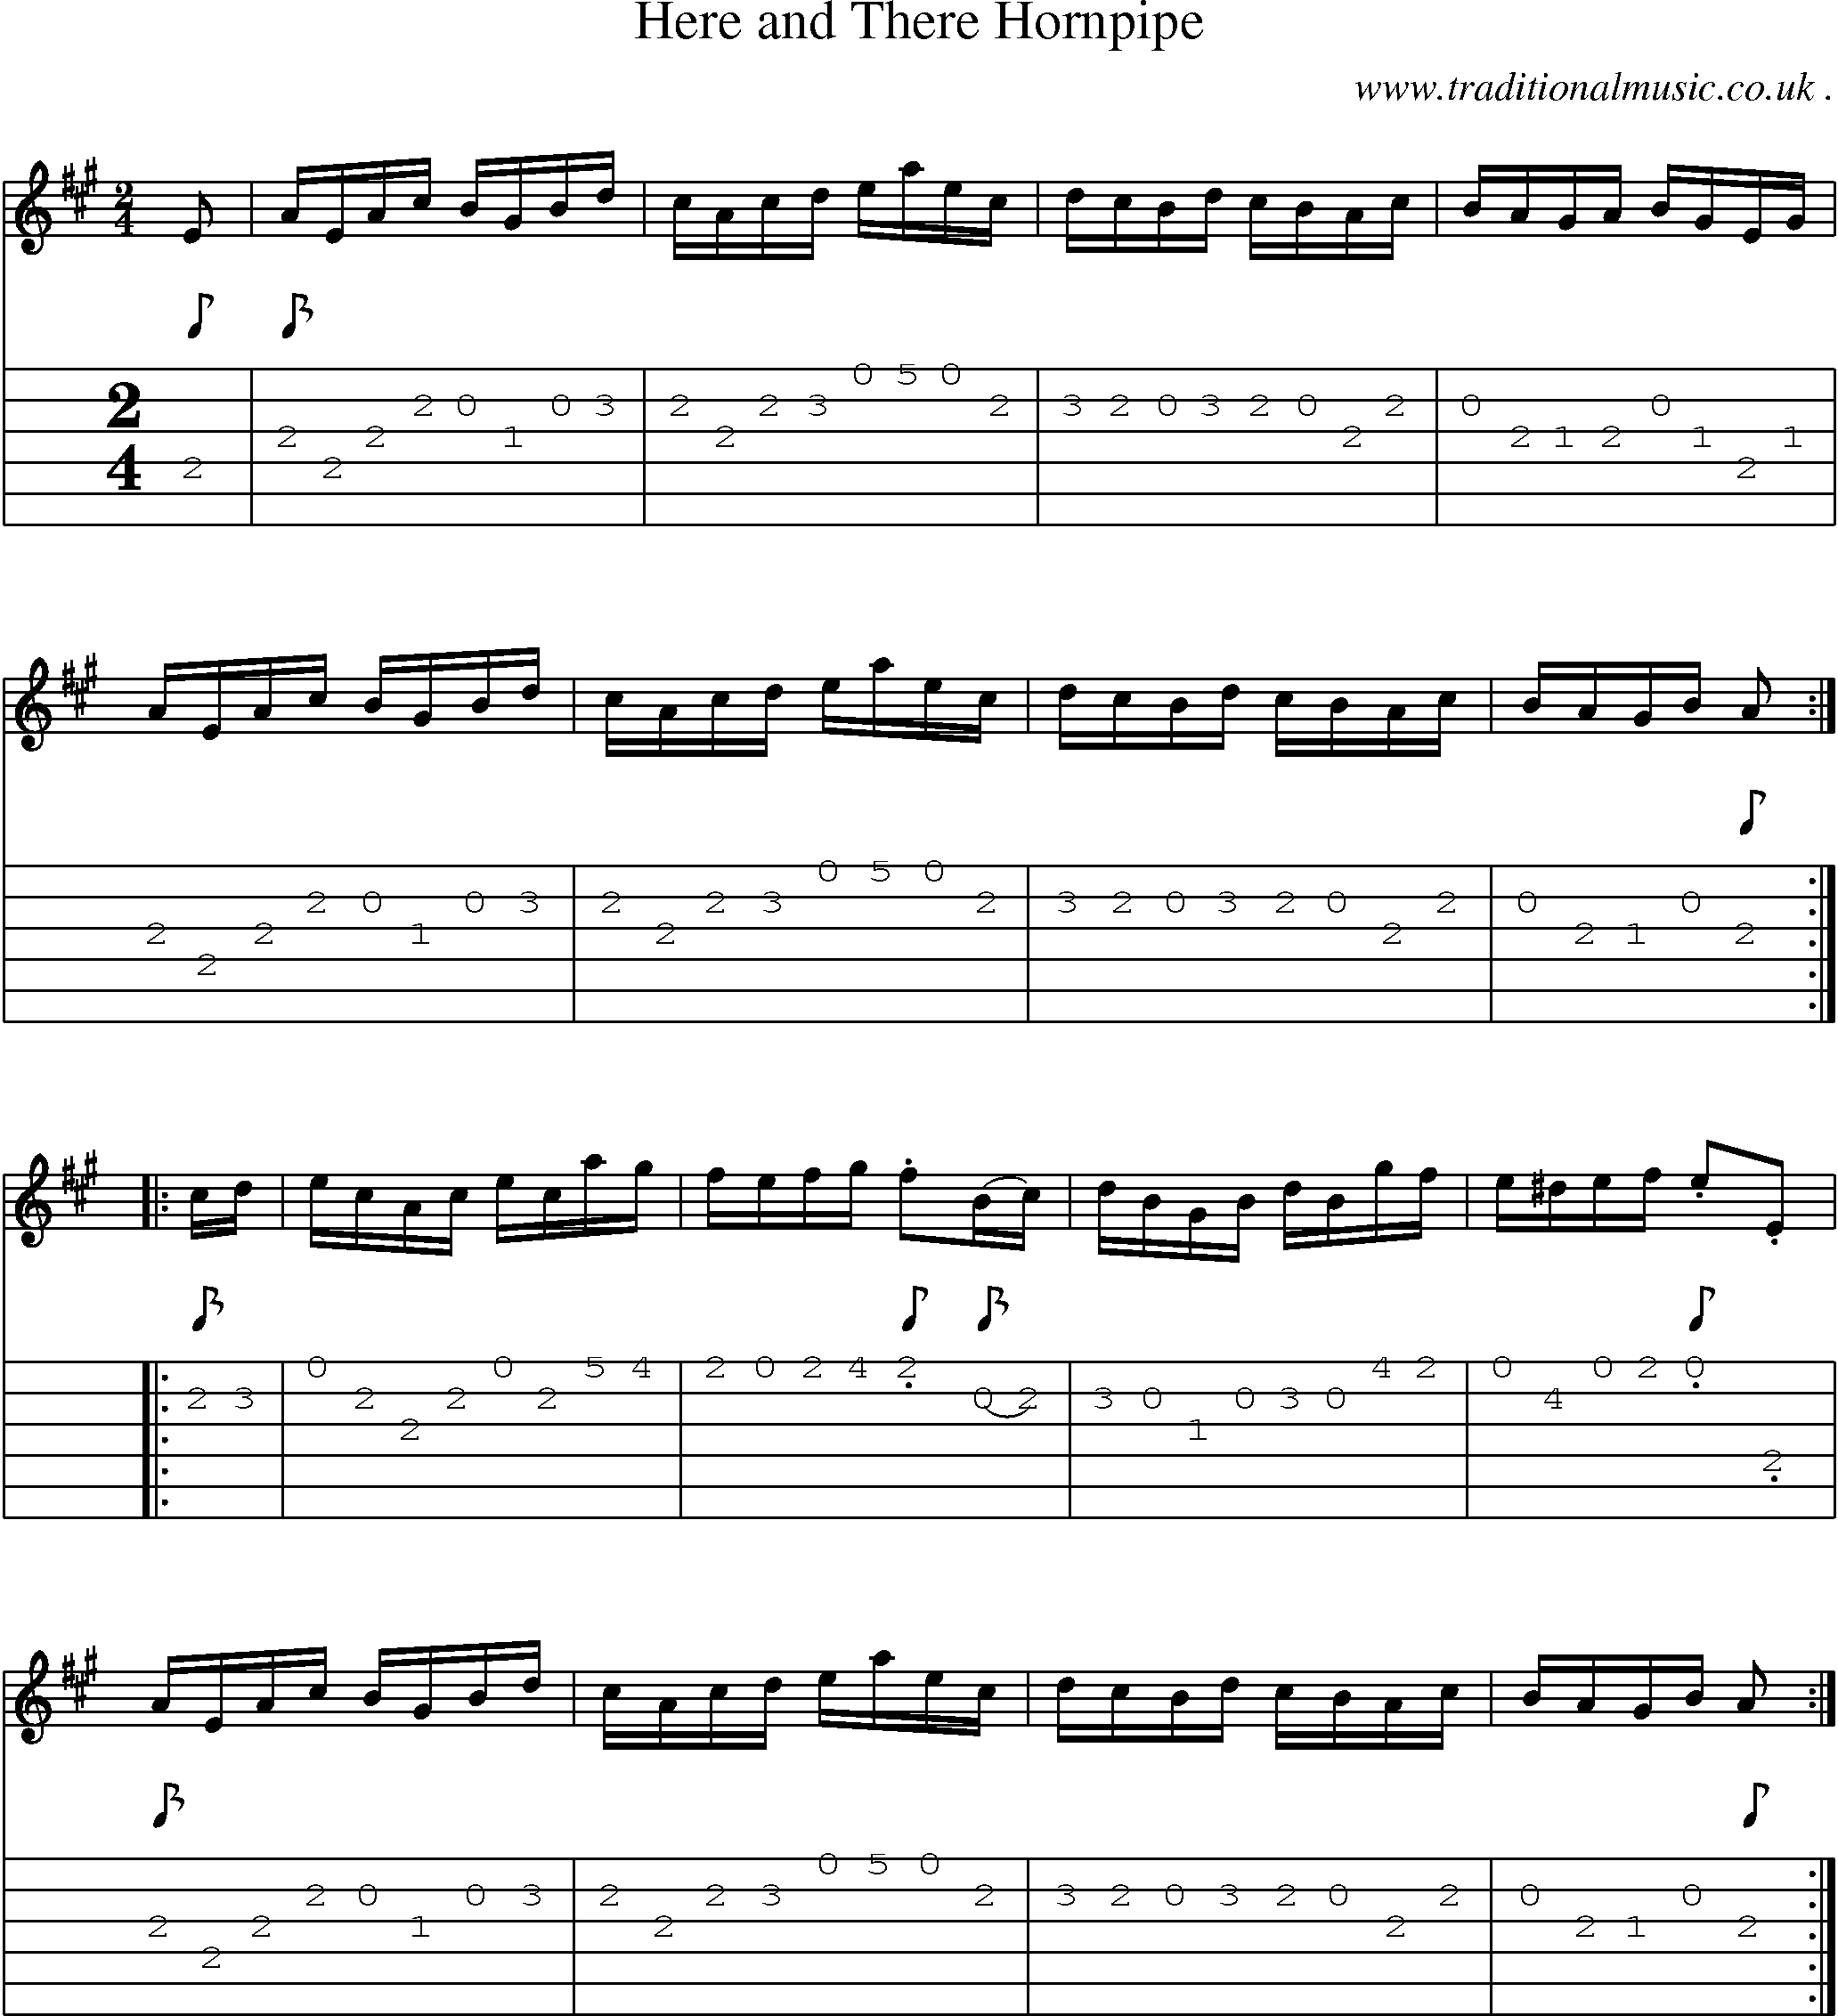 Sheet-Music and Guitar Tabs for Here And There Hornpipe